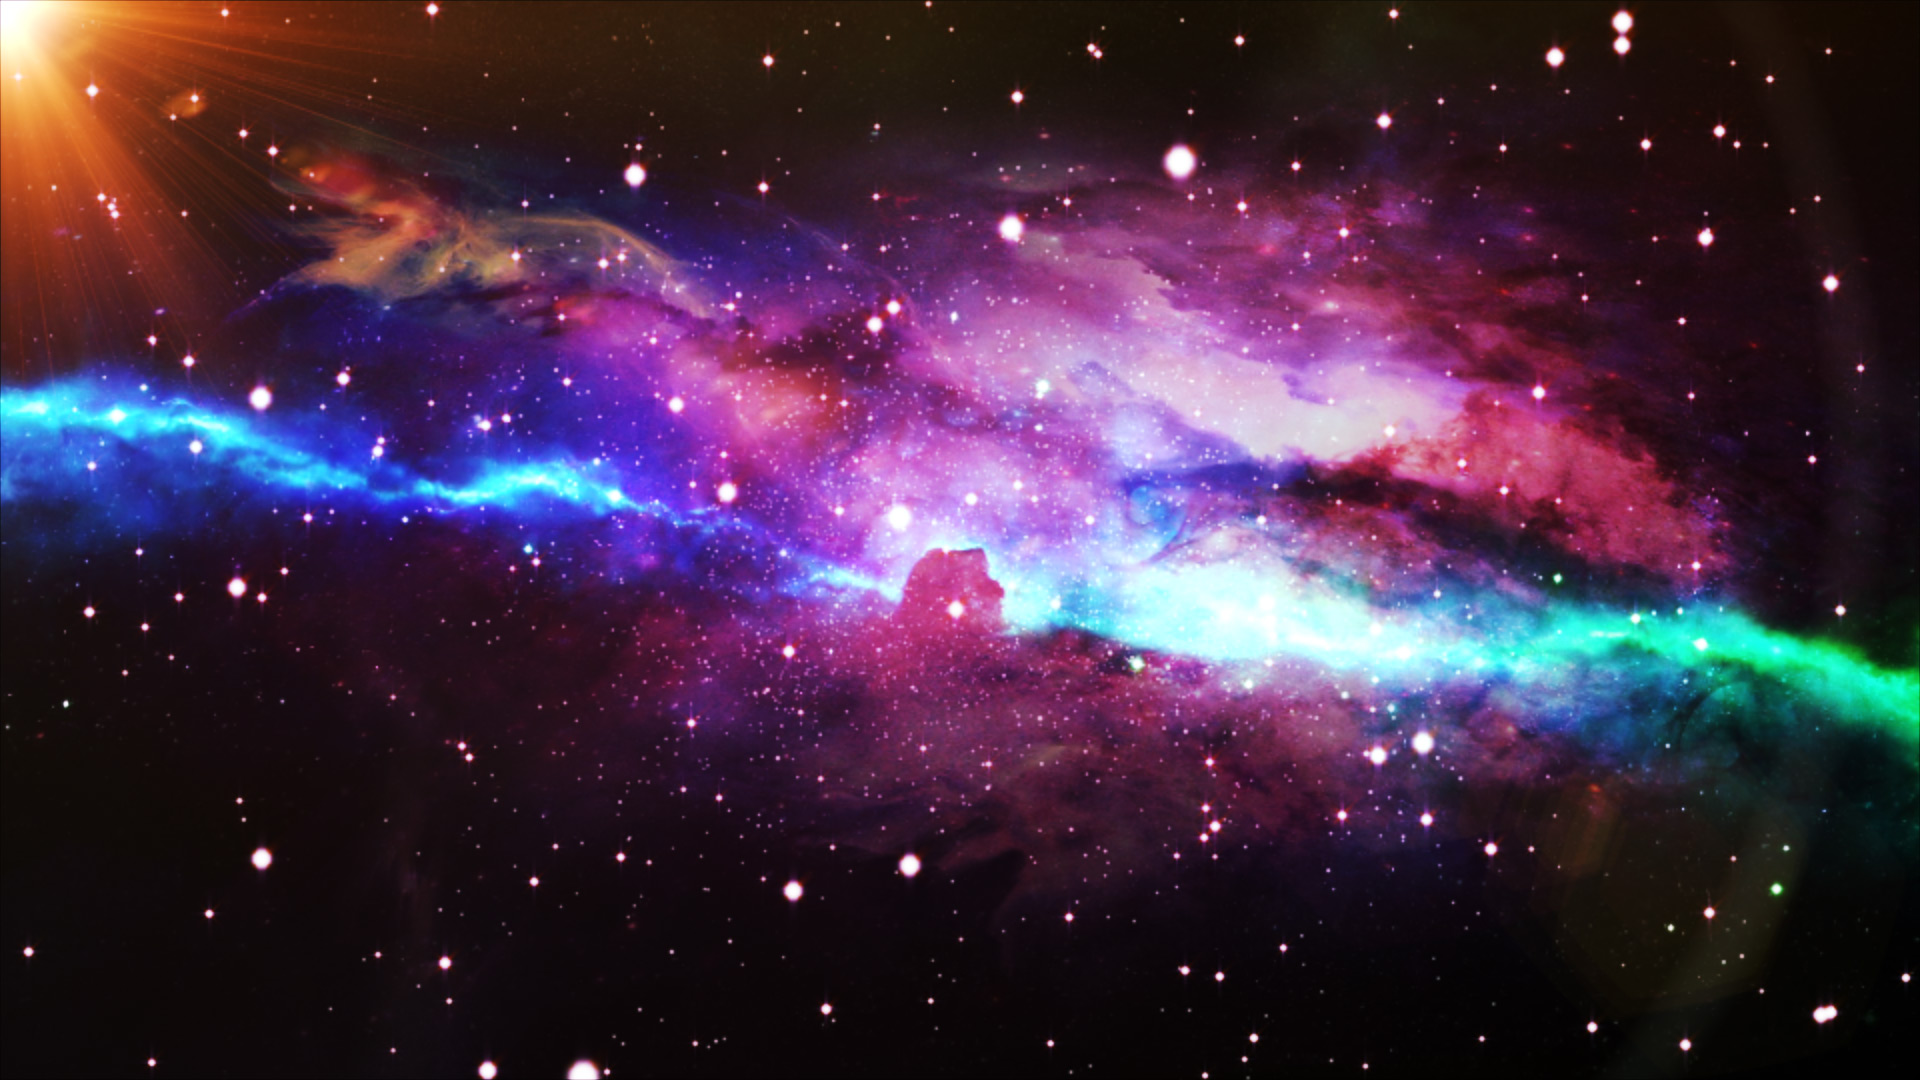 Galaxy in space